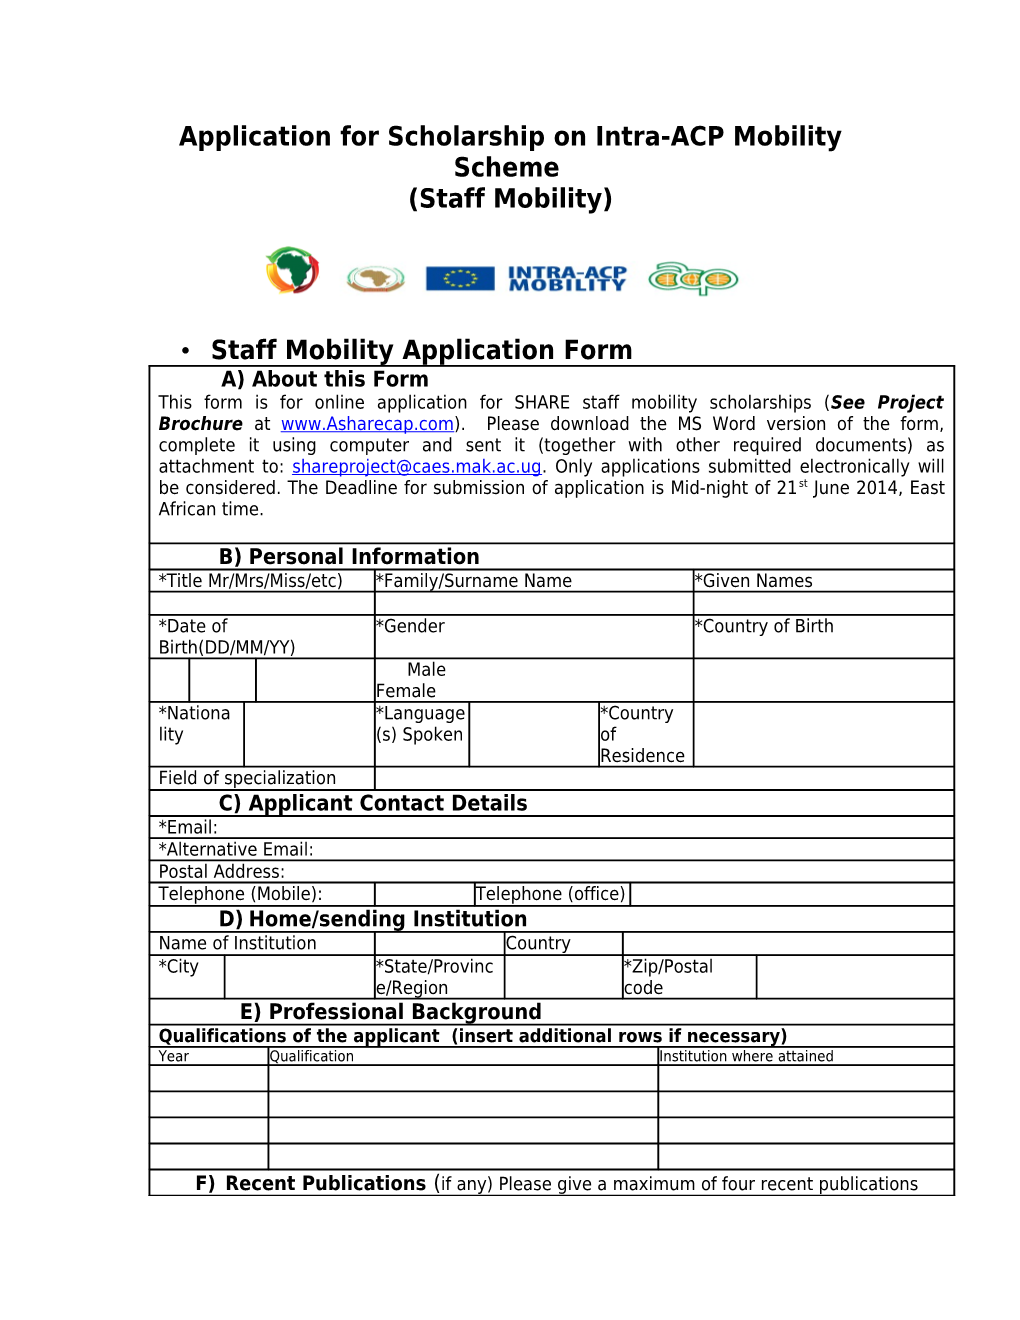 Application for Scholarship on Intra-ACP Mobility Scheme (Staff Mobility)